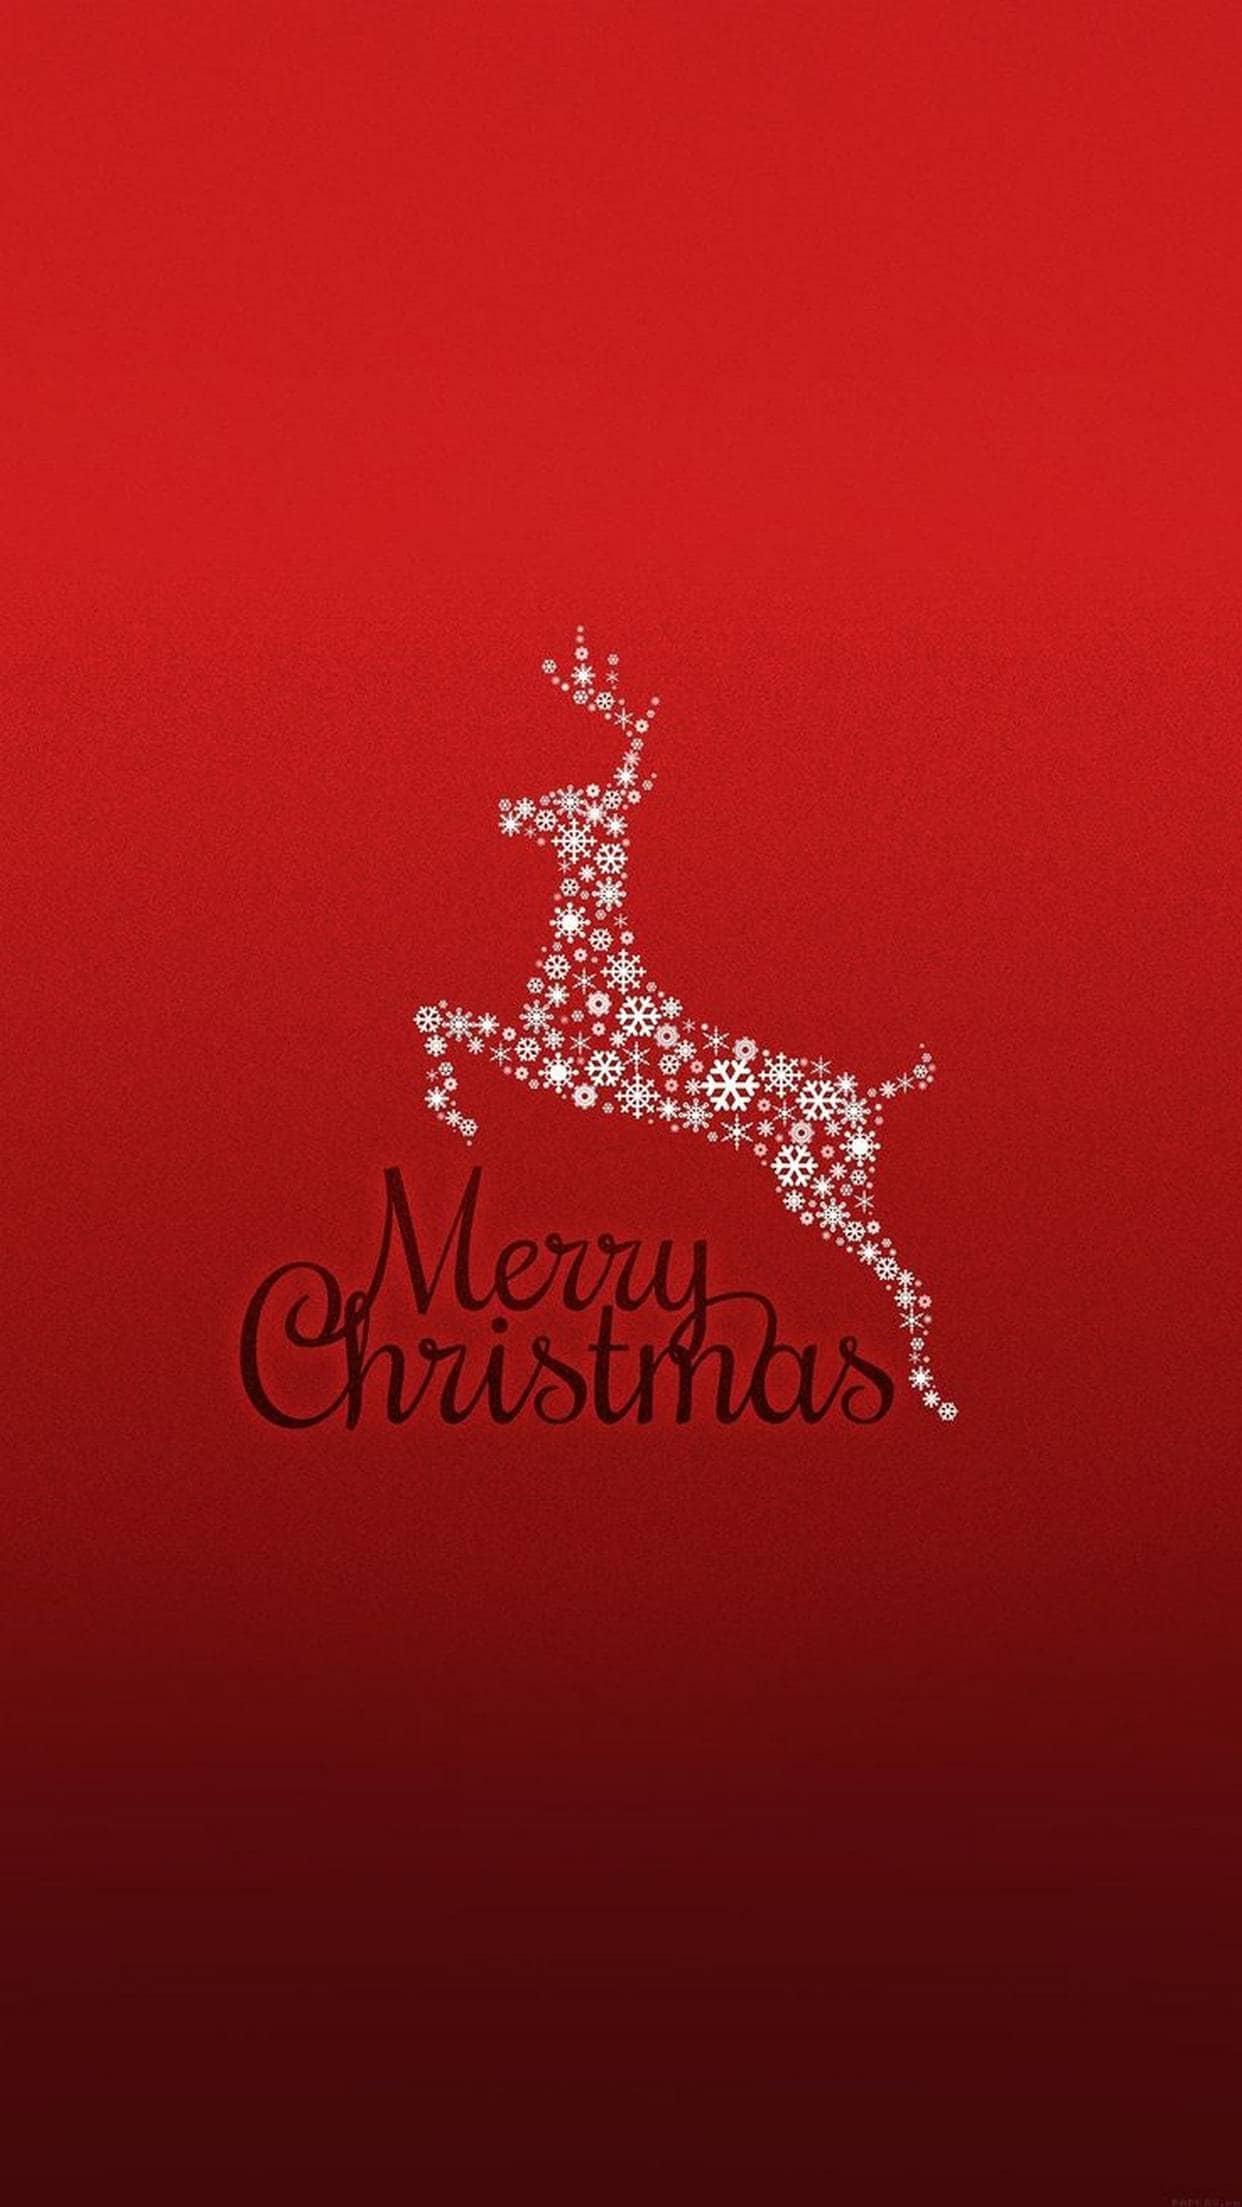 Free download Try to Use Christmas Wallpapers for iPhones [1242x2208 ...